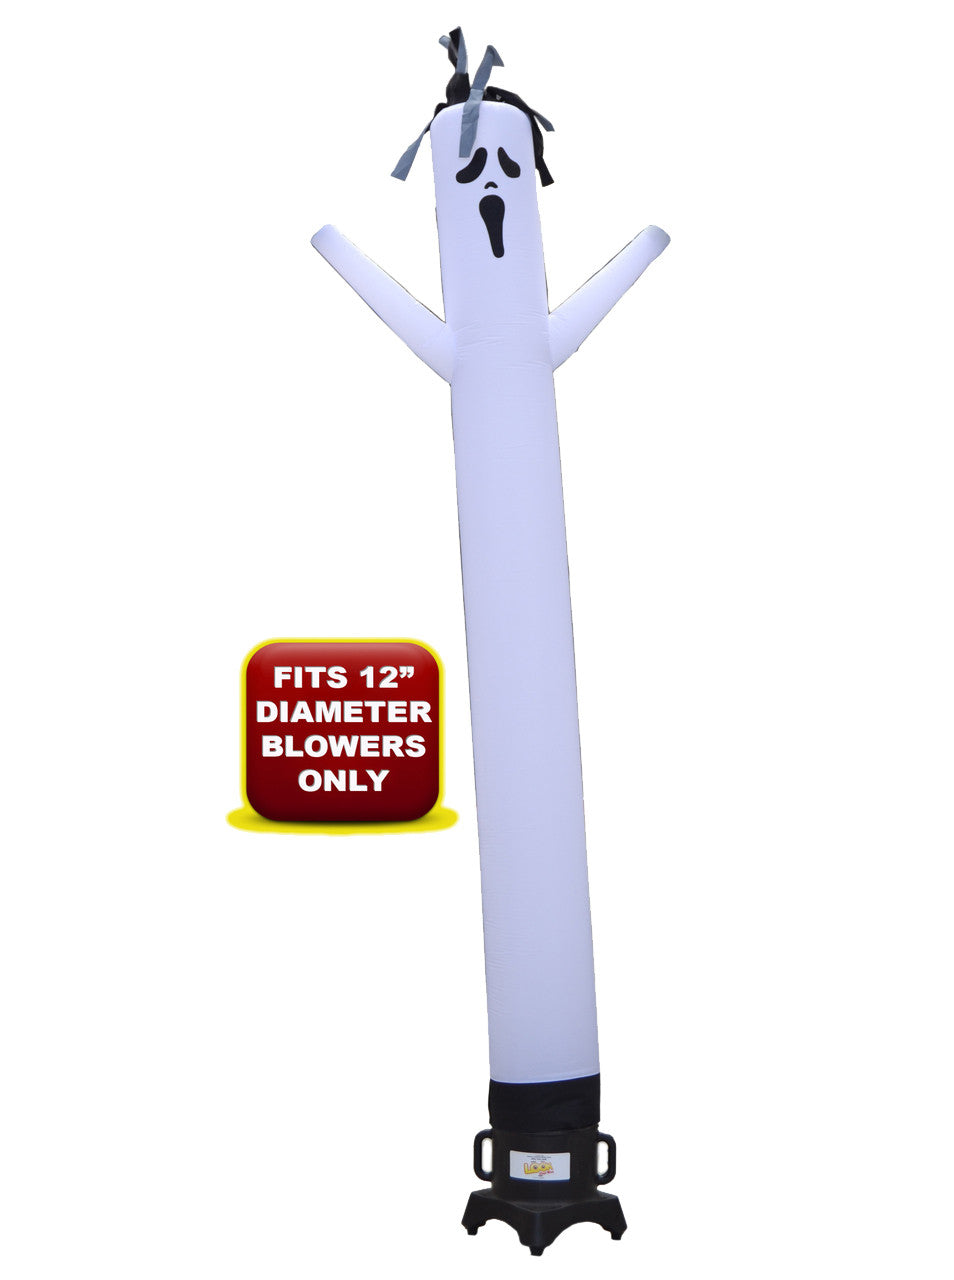 10ft Ghost Air Dancer Inflatable Wacky Wavy Tube Man Dancers